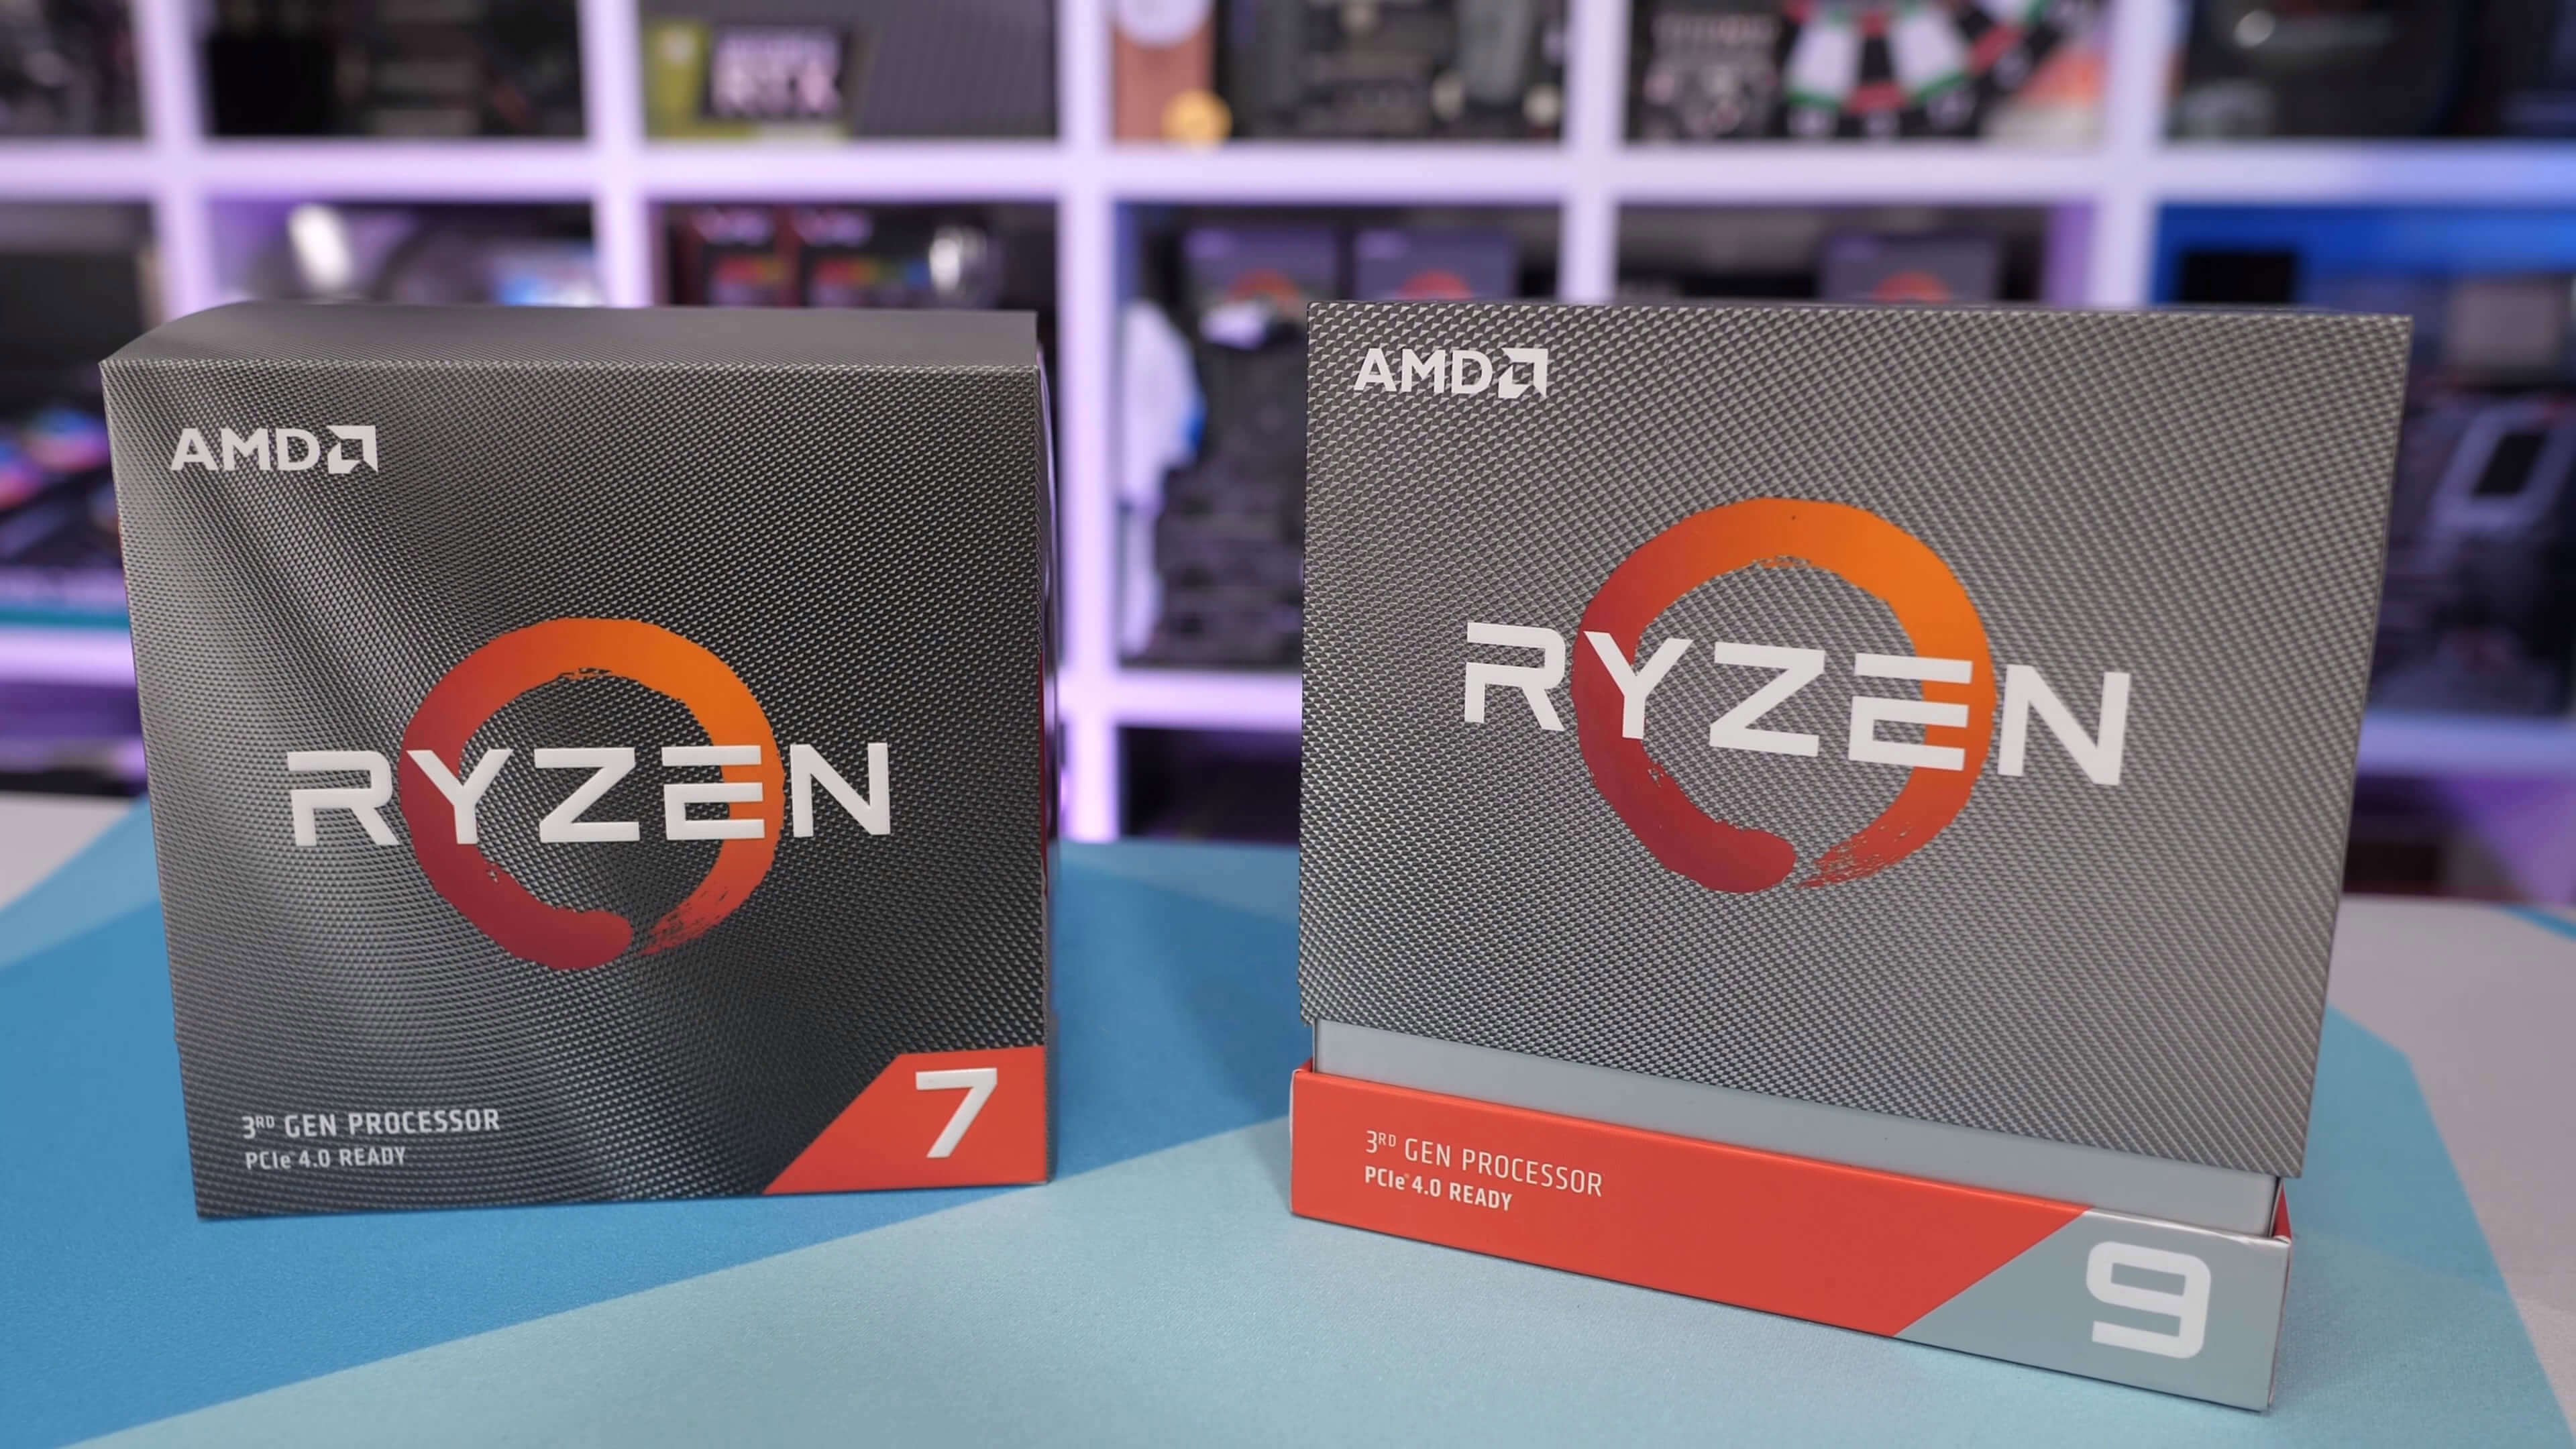 August Steam hardware survey shows AMD increasing its CPU share as Intel falters, Turing cards keep growing